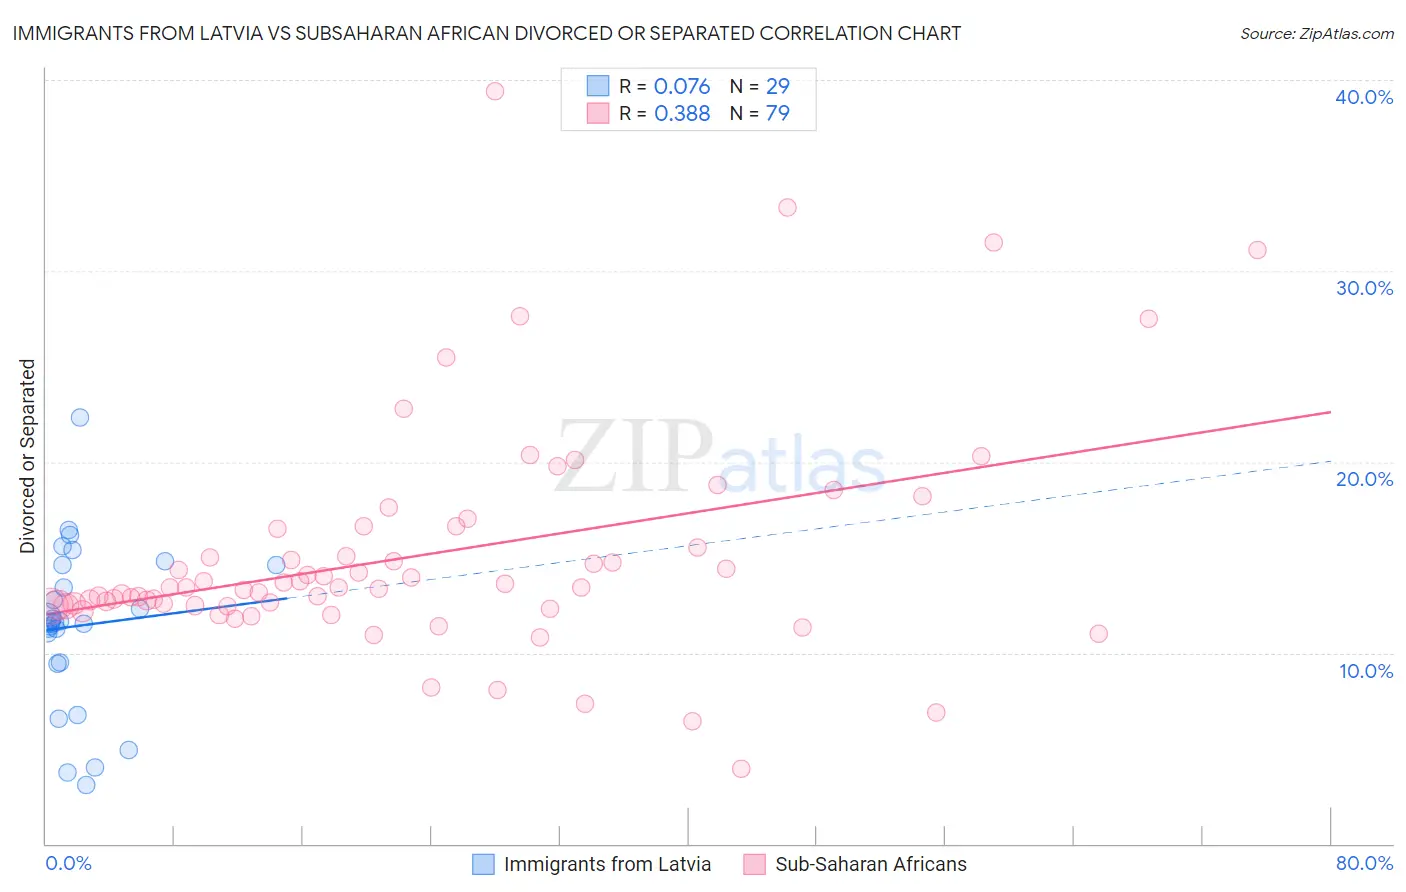 Immigrants from Latvia vs Subsaharan African Divorced or Separated